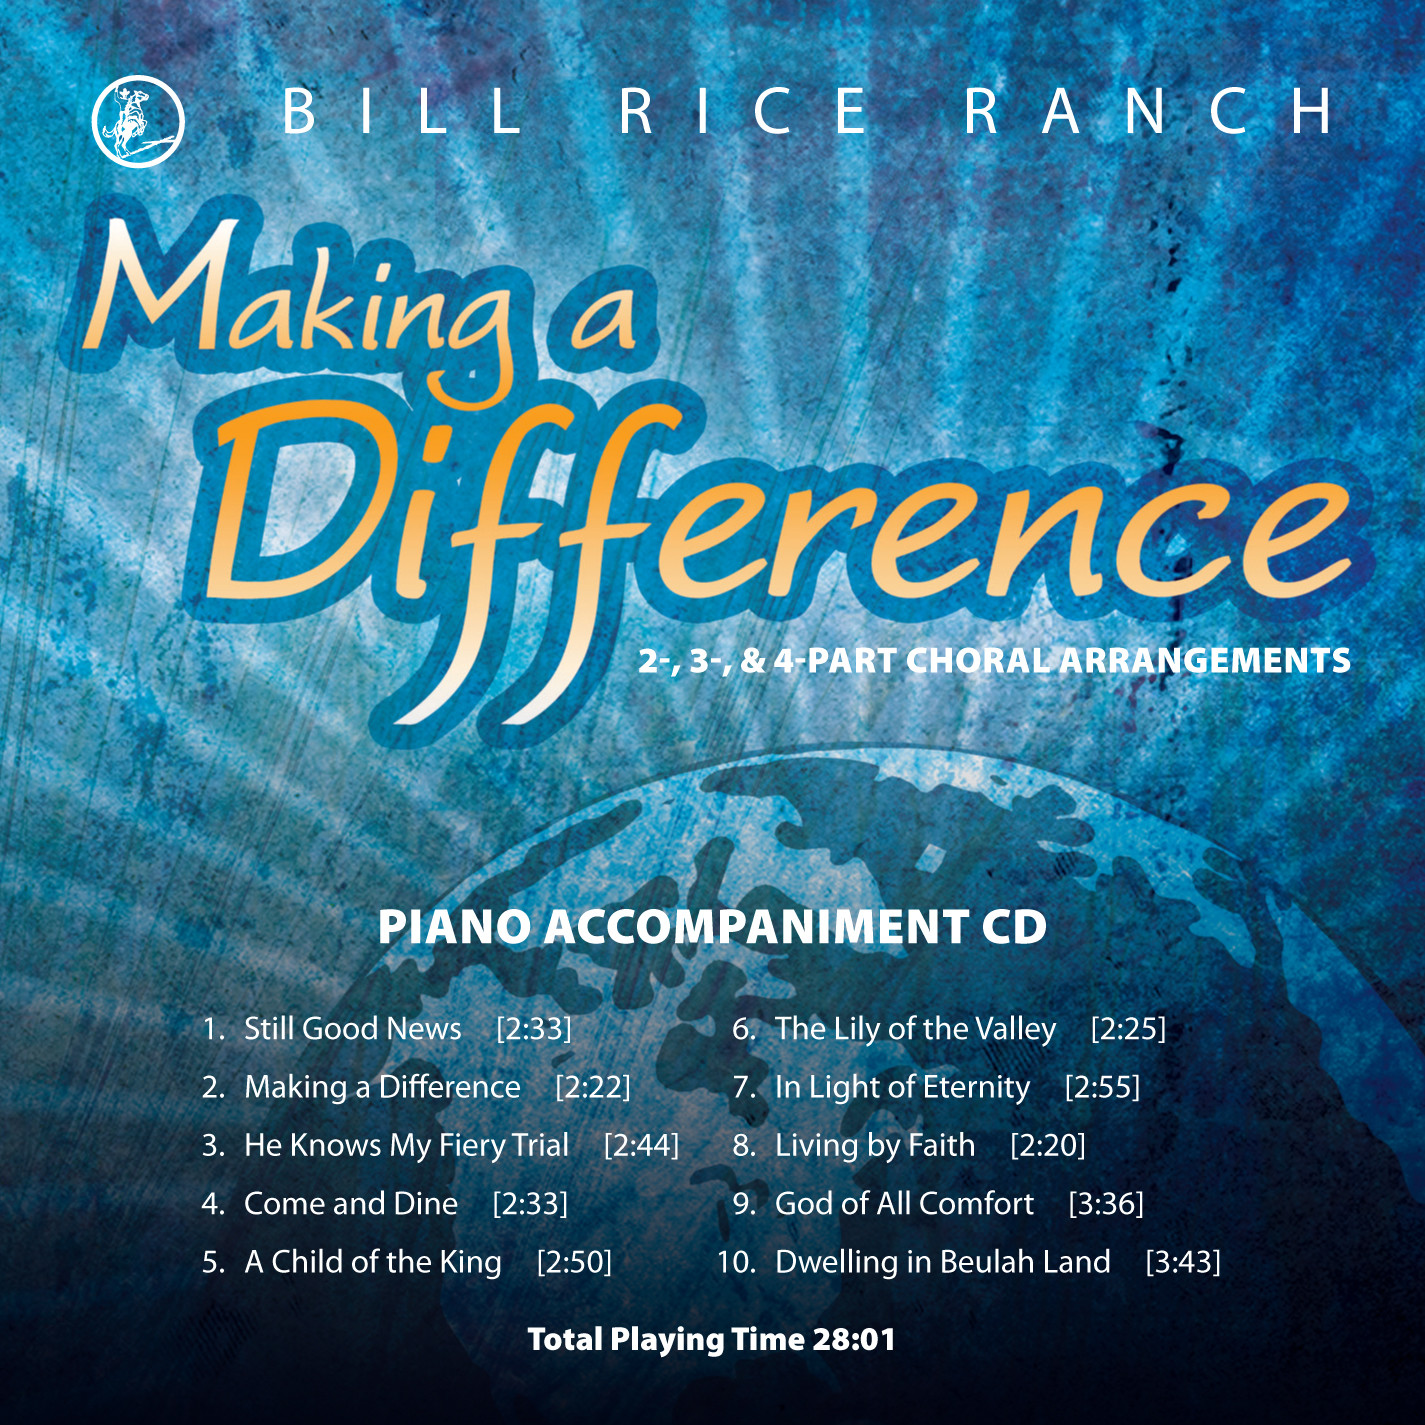 Making A Difference - Accompaniment CD